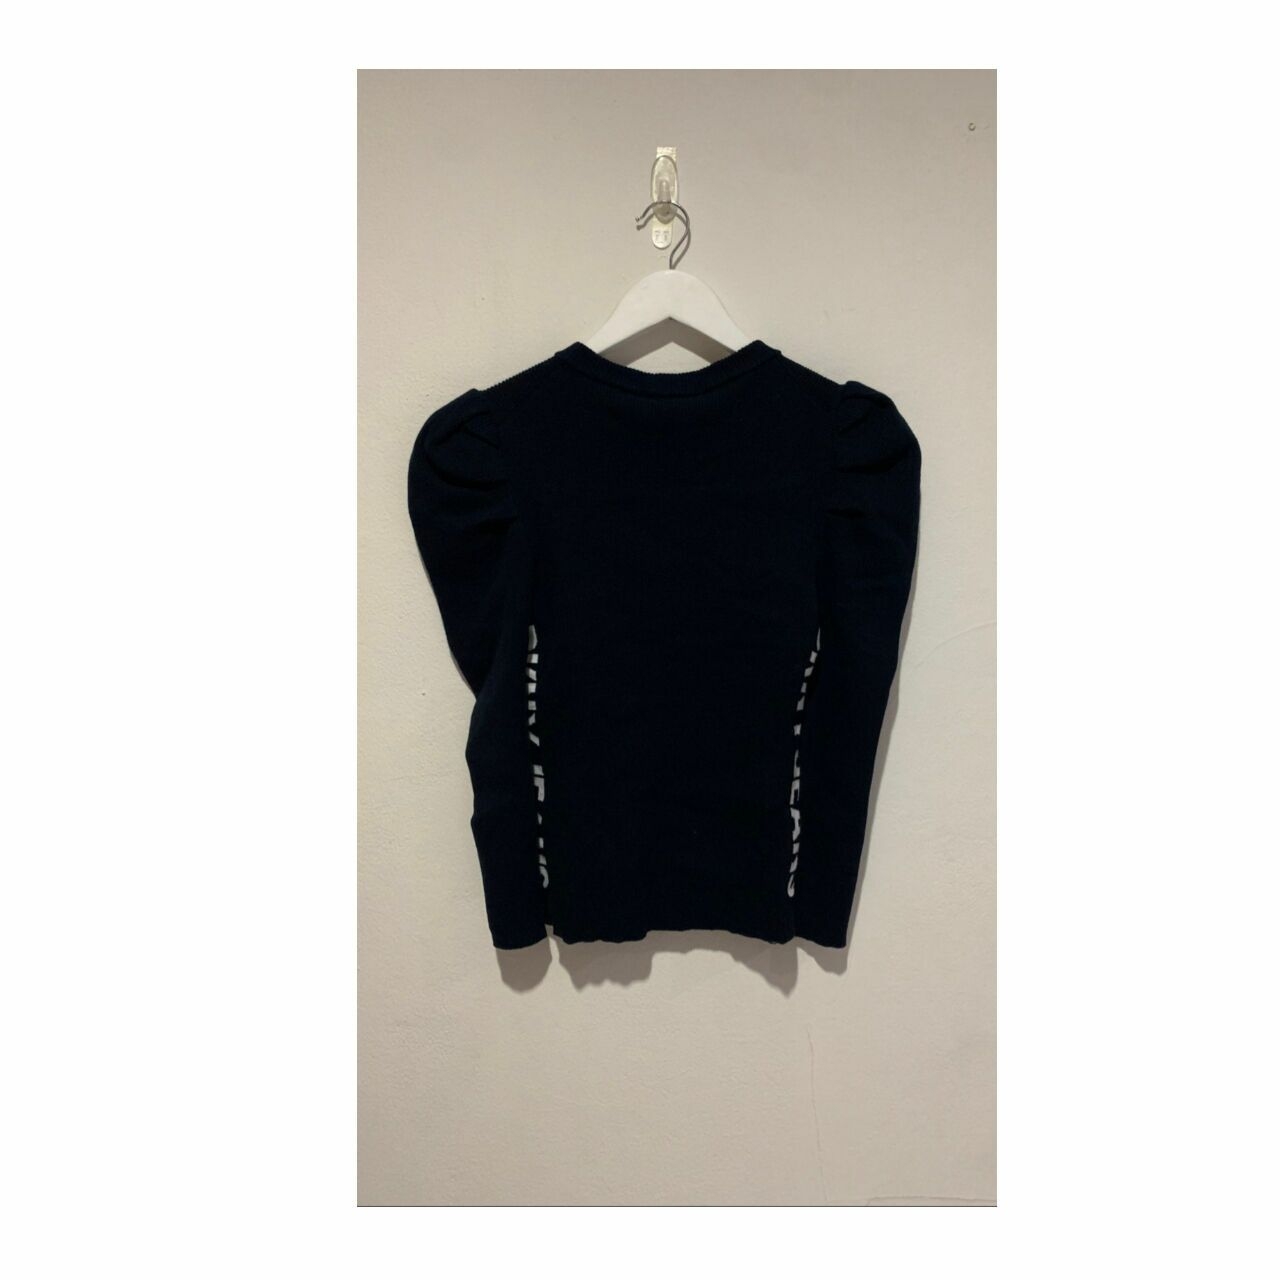 Dkny Jeans Puff Sleeve Sweater